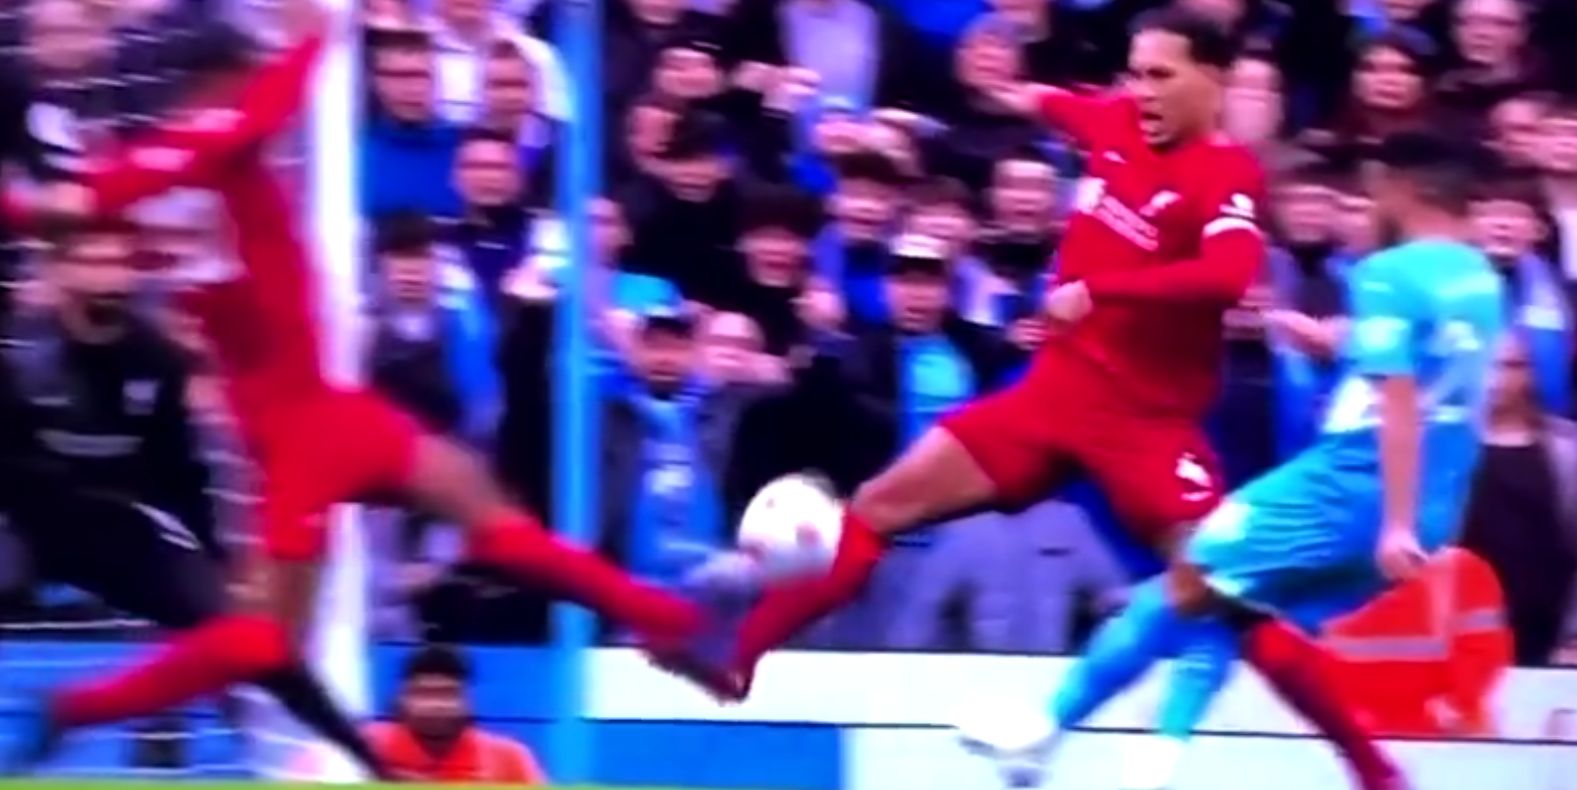 (Video) Watch as new footage suggests Joel Matip deflected Riyad Mahrez’s late effort over the bar and saved a point for the Reds